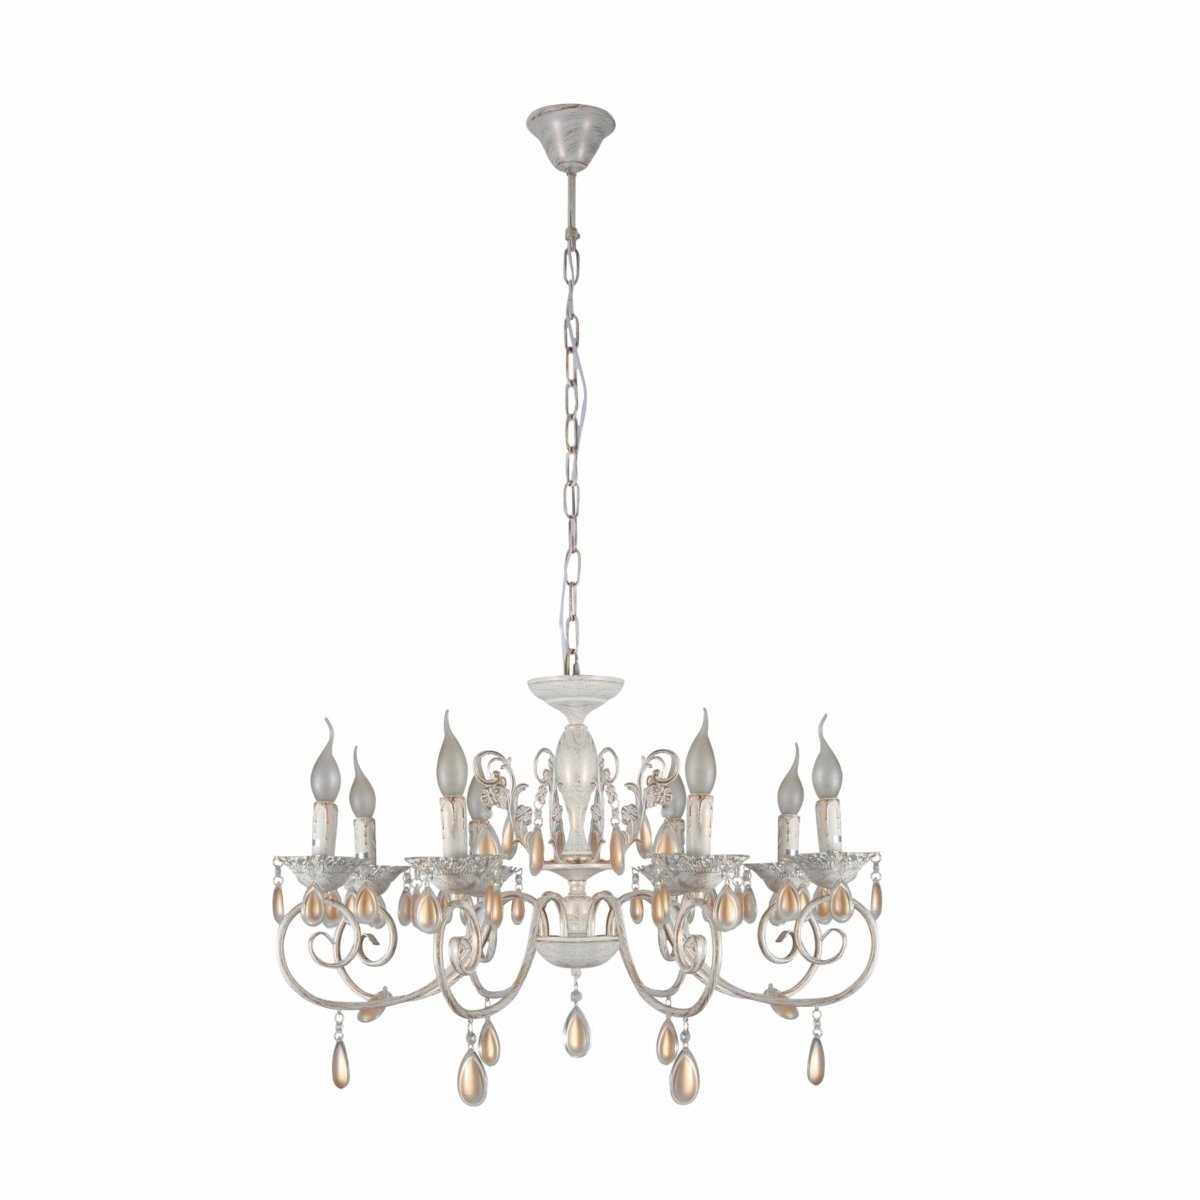 Main image of Amber Crystals Rice White with Gold Brushed Metal 8 Arm Chandelier with E14 Fitting | TEKLED 158-17852